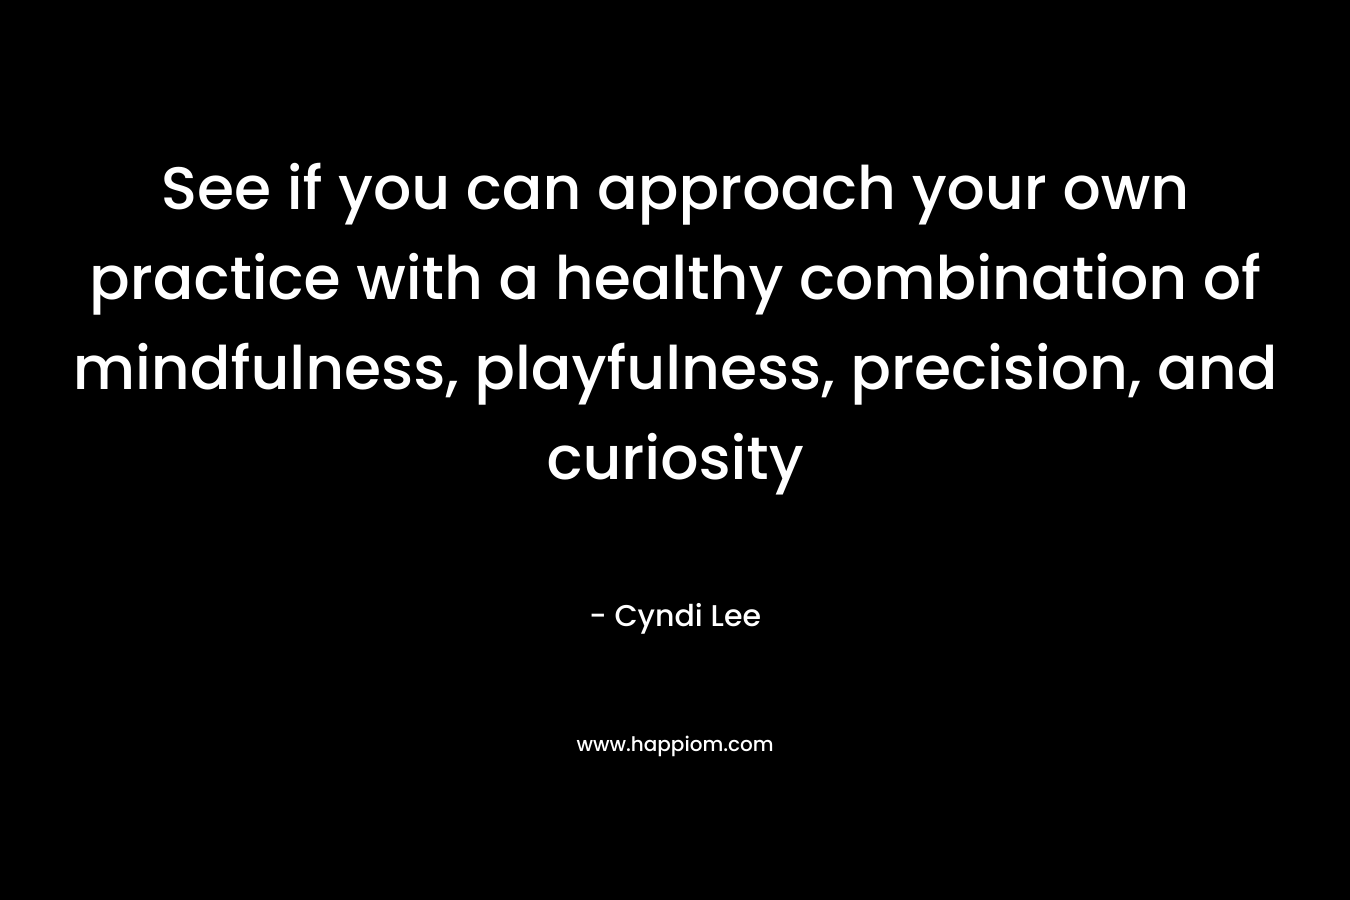 See if you can approach your own practice with a healthy combination of mindfulness, playfulness, precision, and curiosity